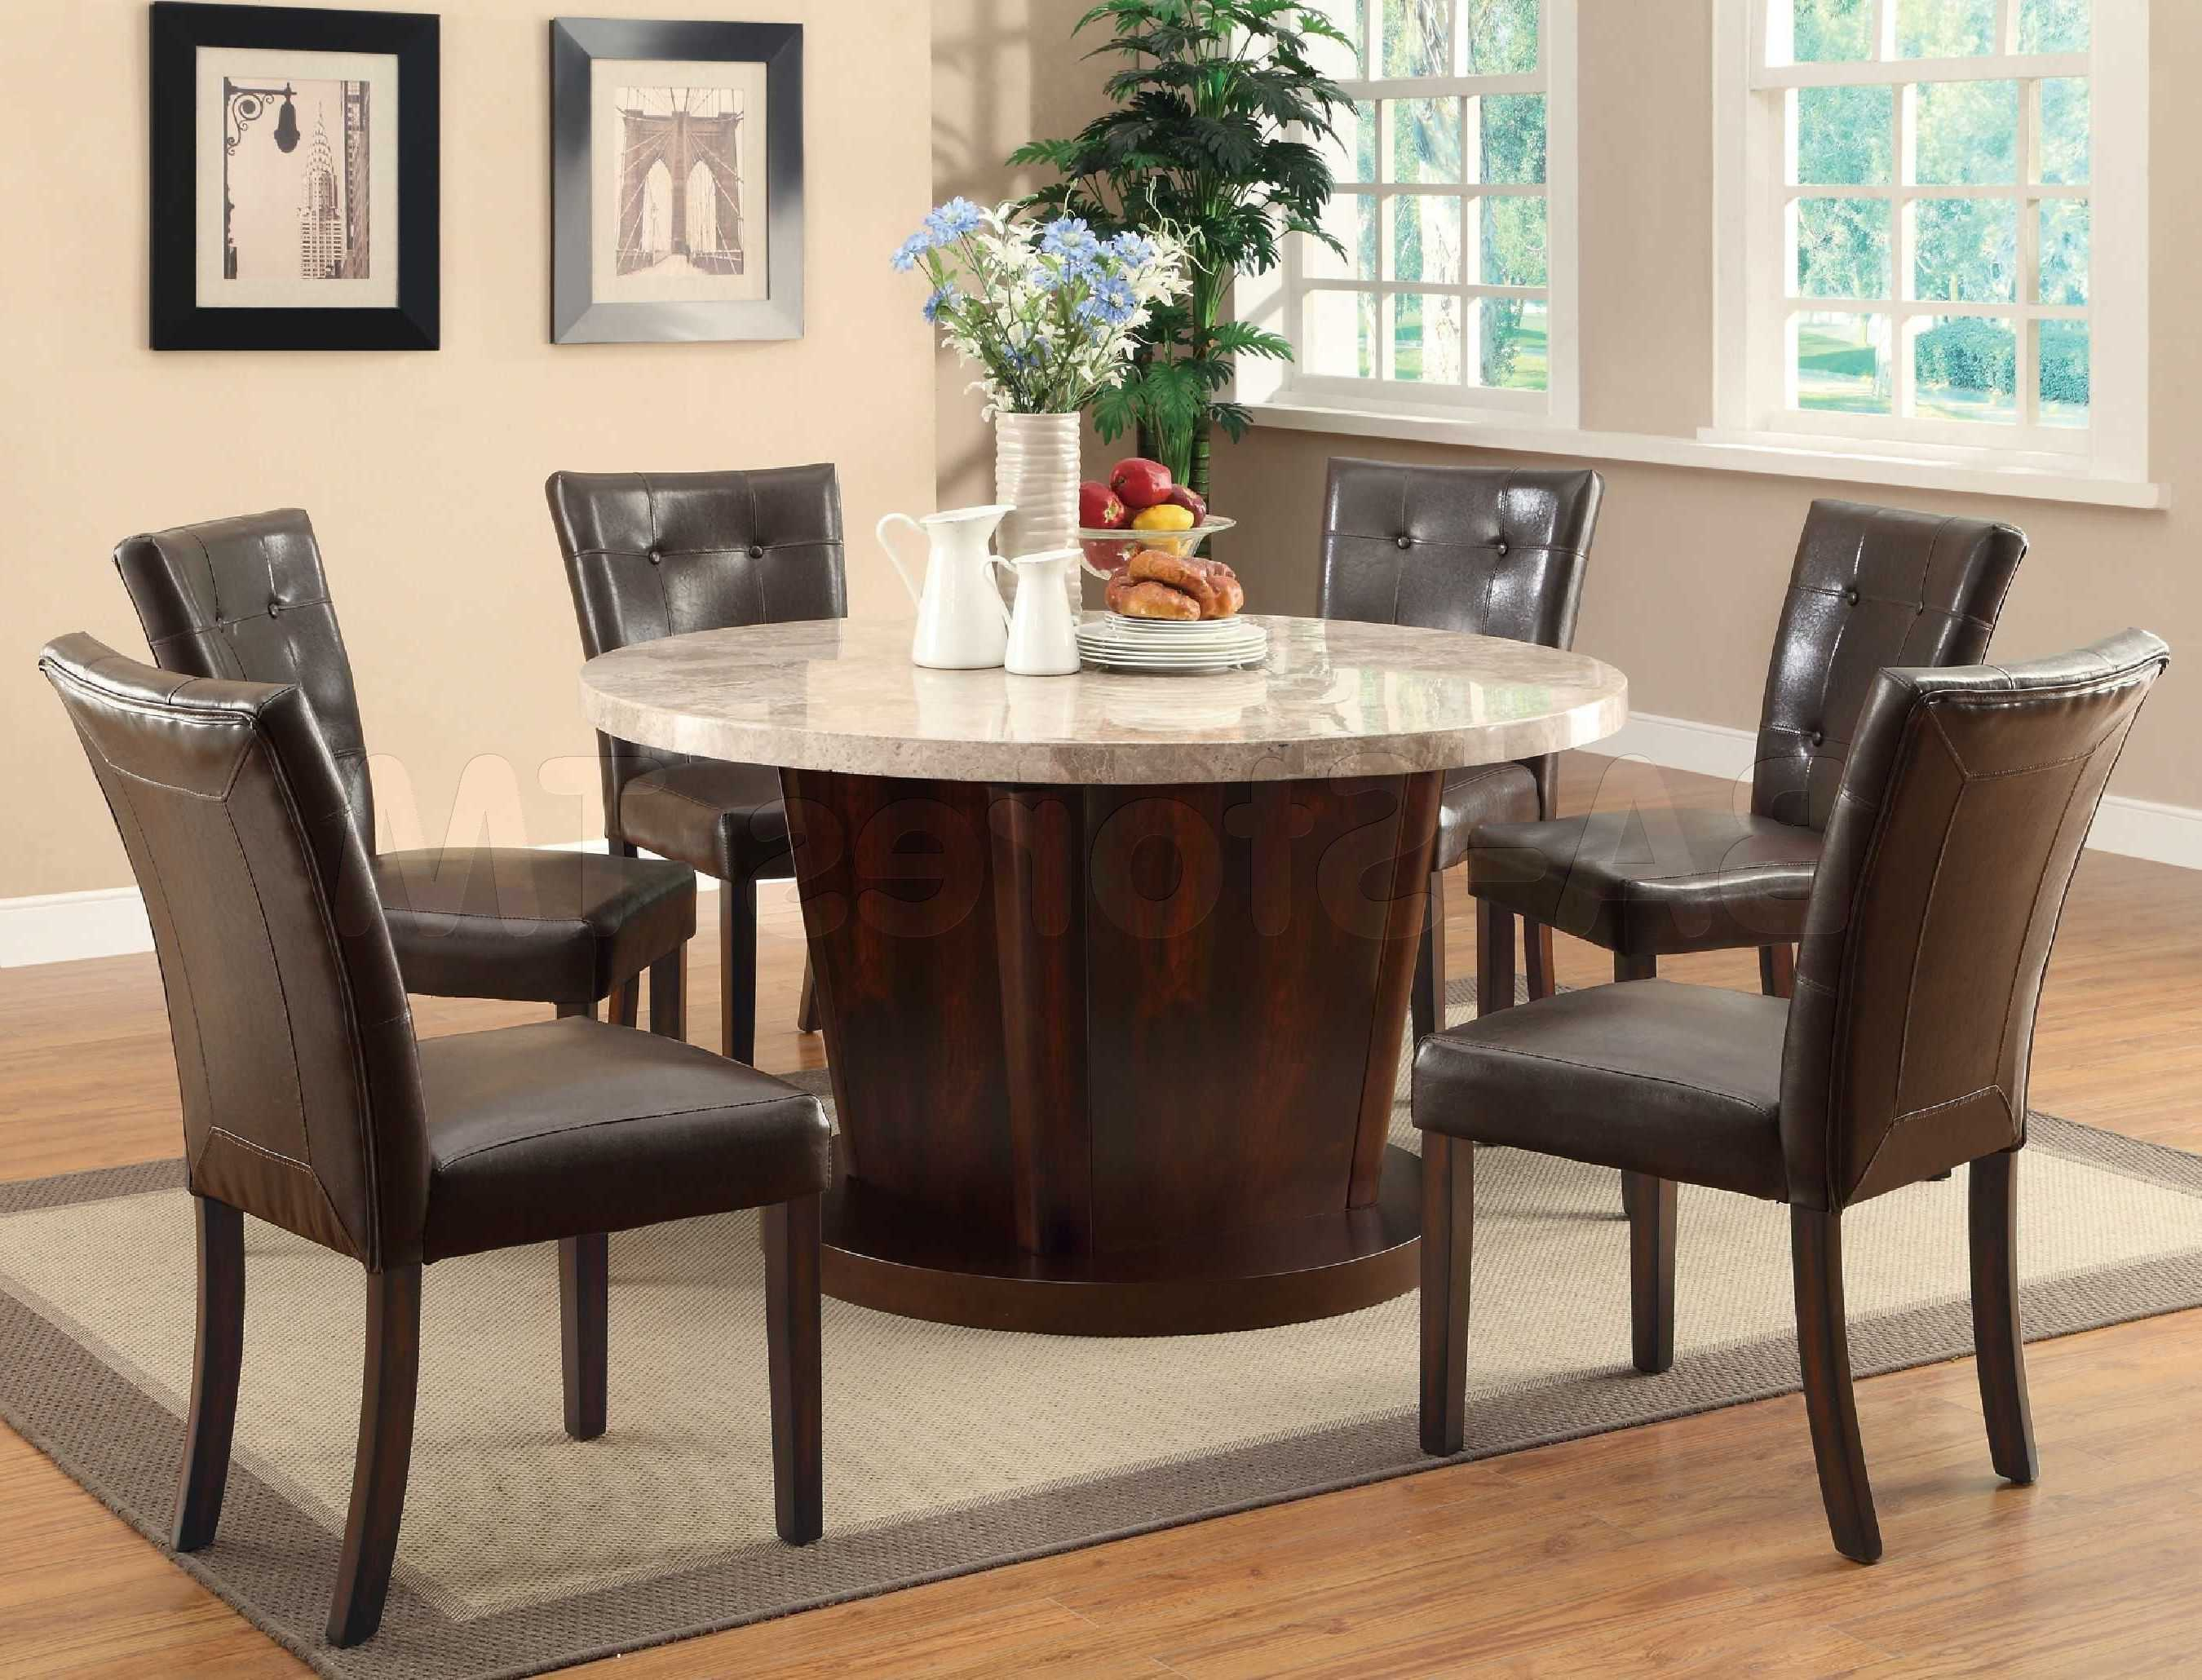 Stylish Big Lot Dining Room Furniture Artistic Wonderful intended for sizing 2700 X 2060